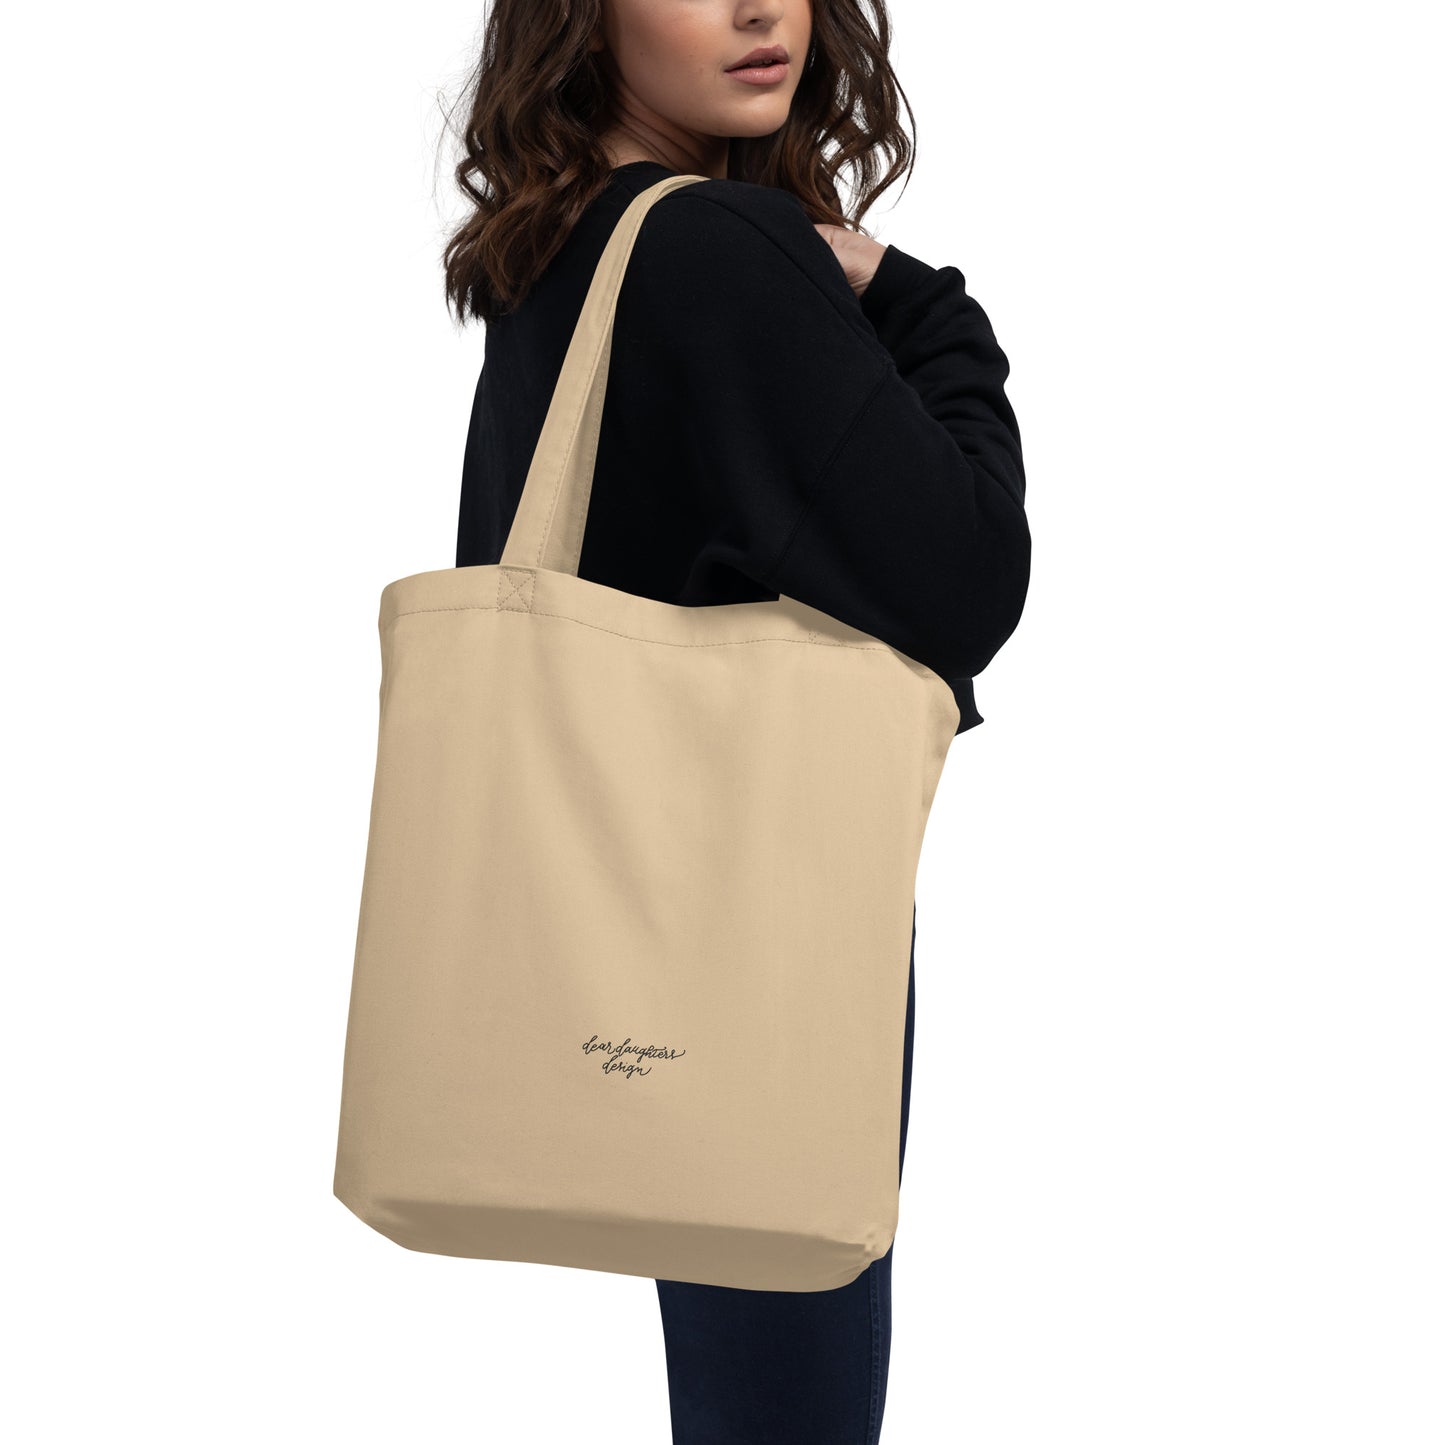 Script "Strong" Calligraphy Certified Organic Cotton Canvas Medium Eco Tote Bag